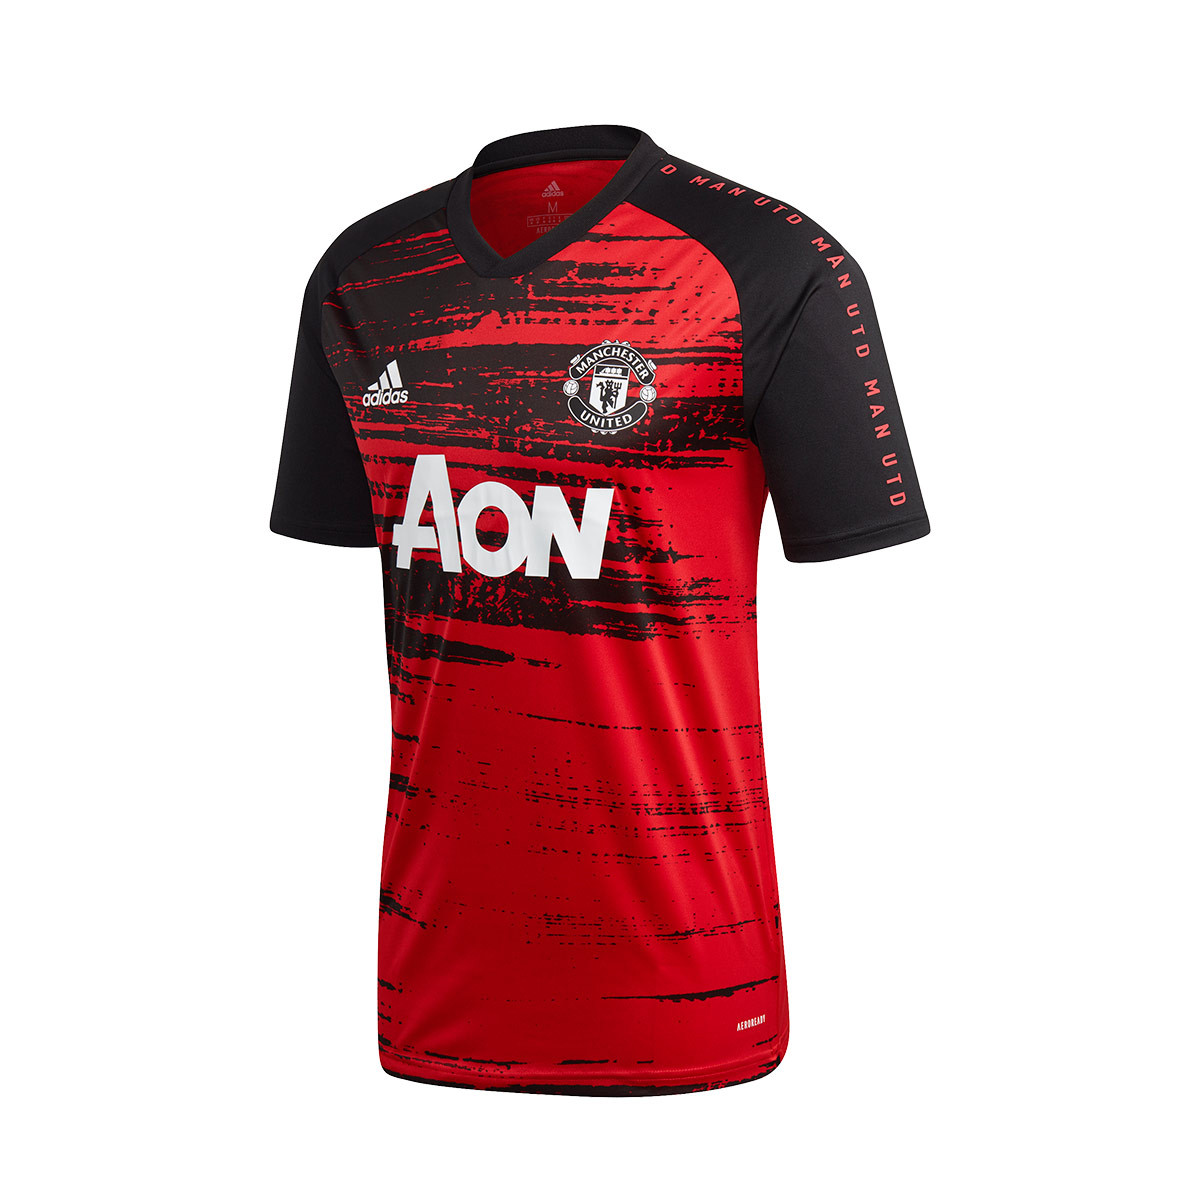 aon manchester united jersey